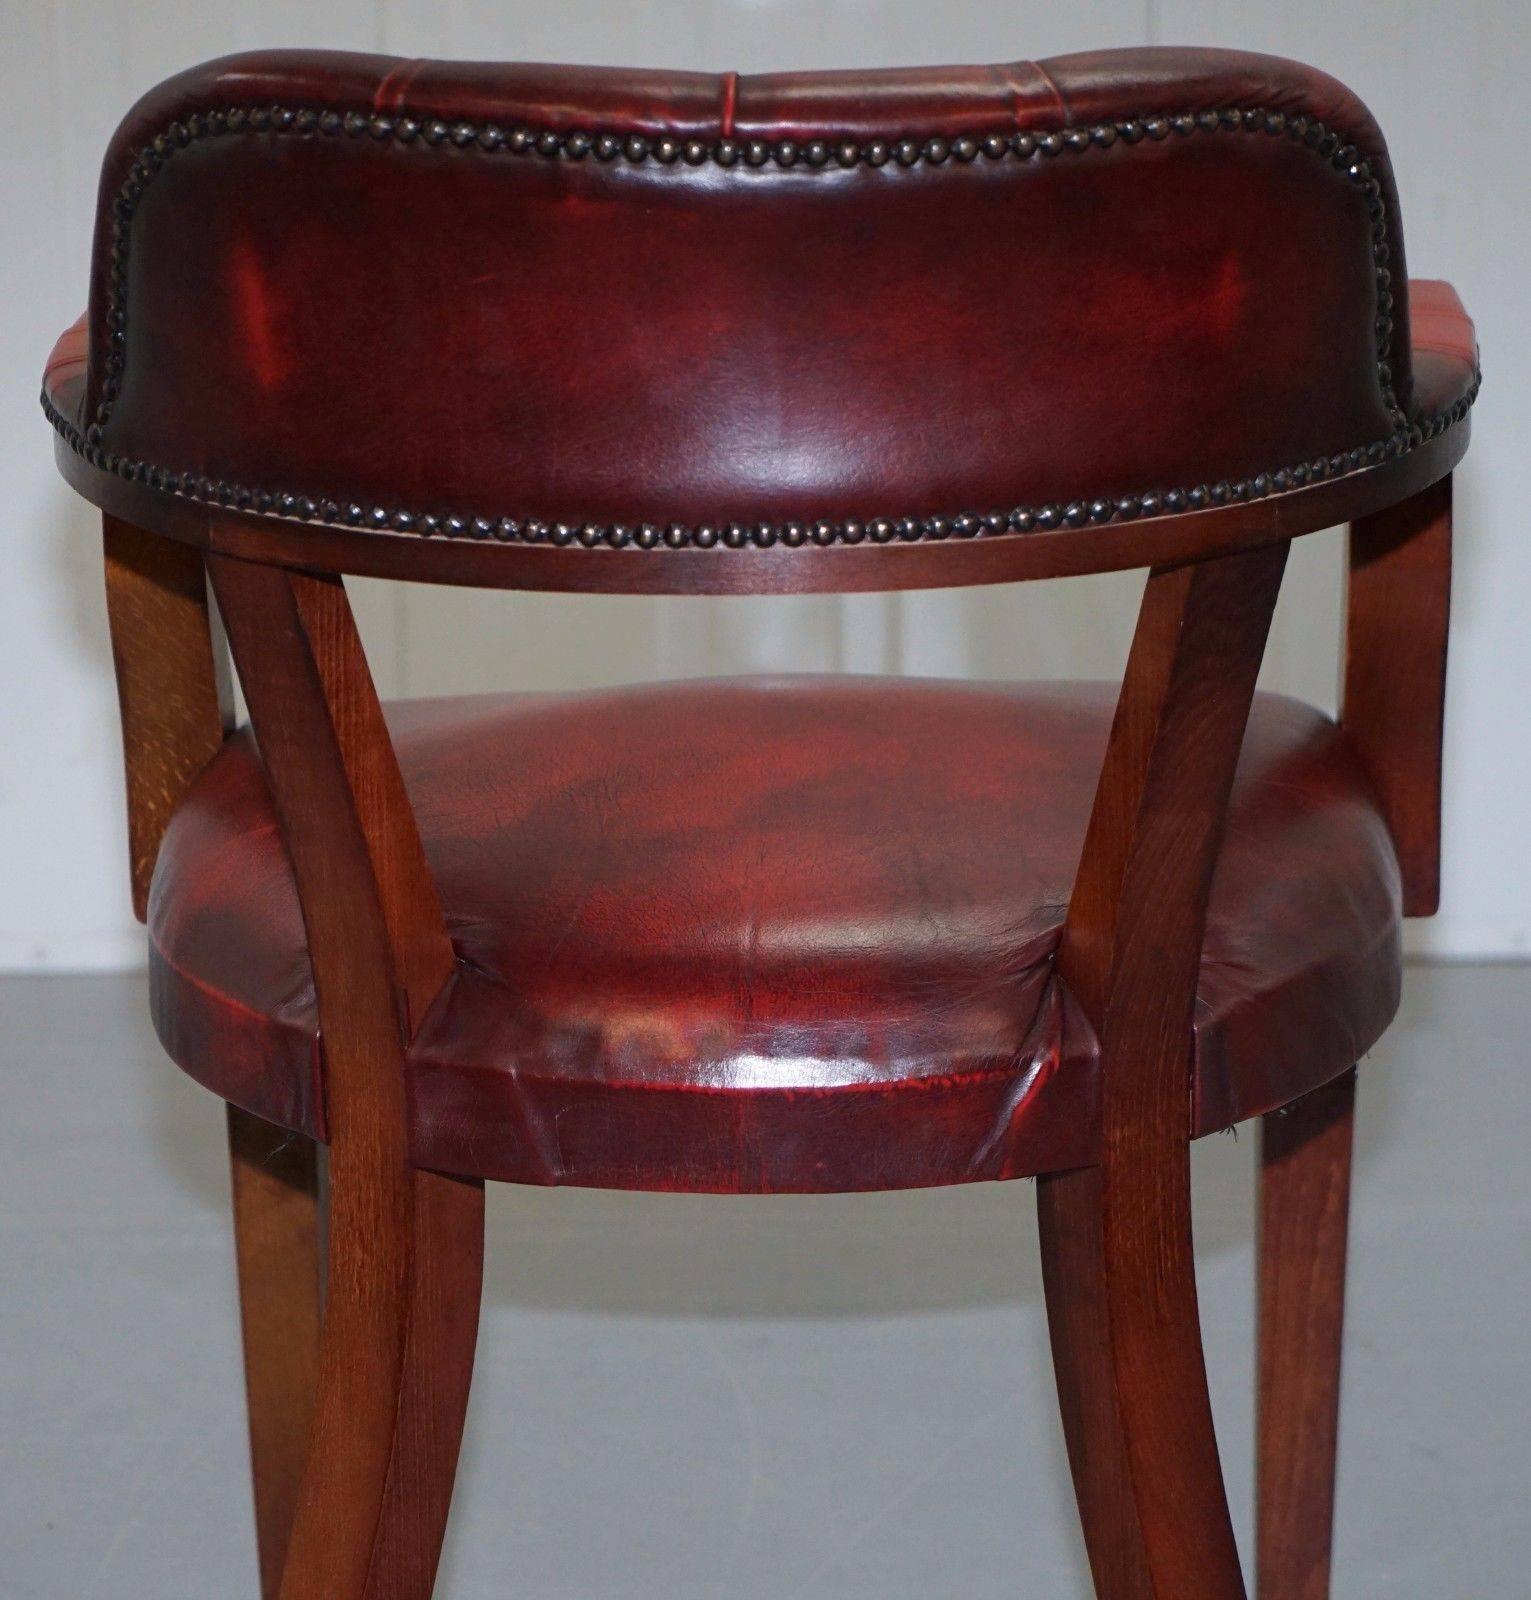 Lovely Oxblood Leather Chesterfield Court Chair for Desks or Guests Lovely Find 3